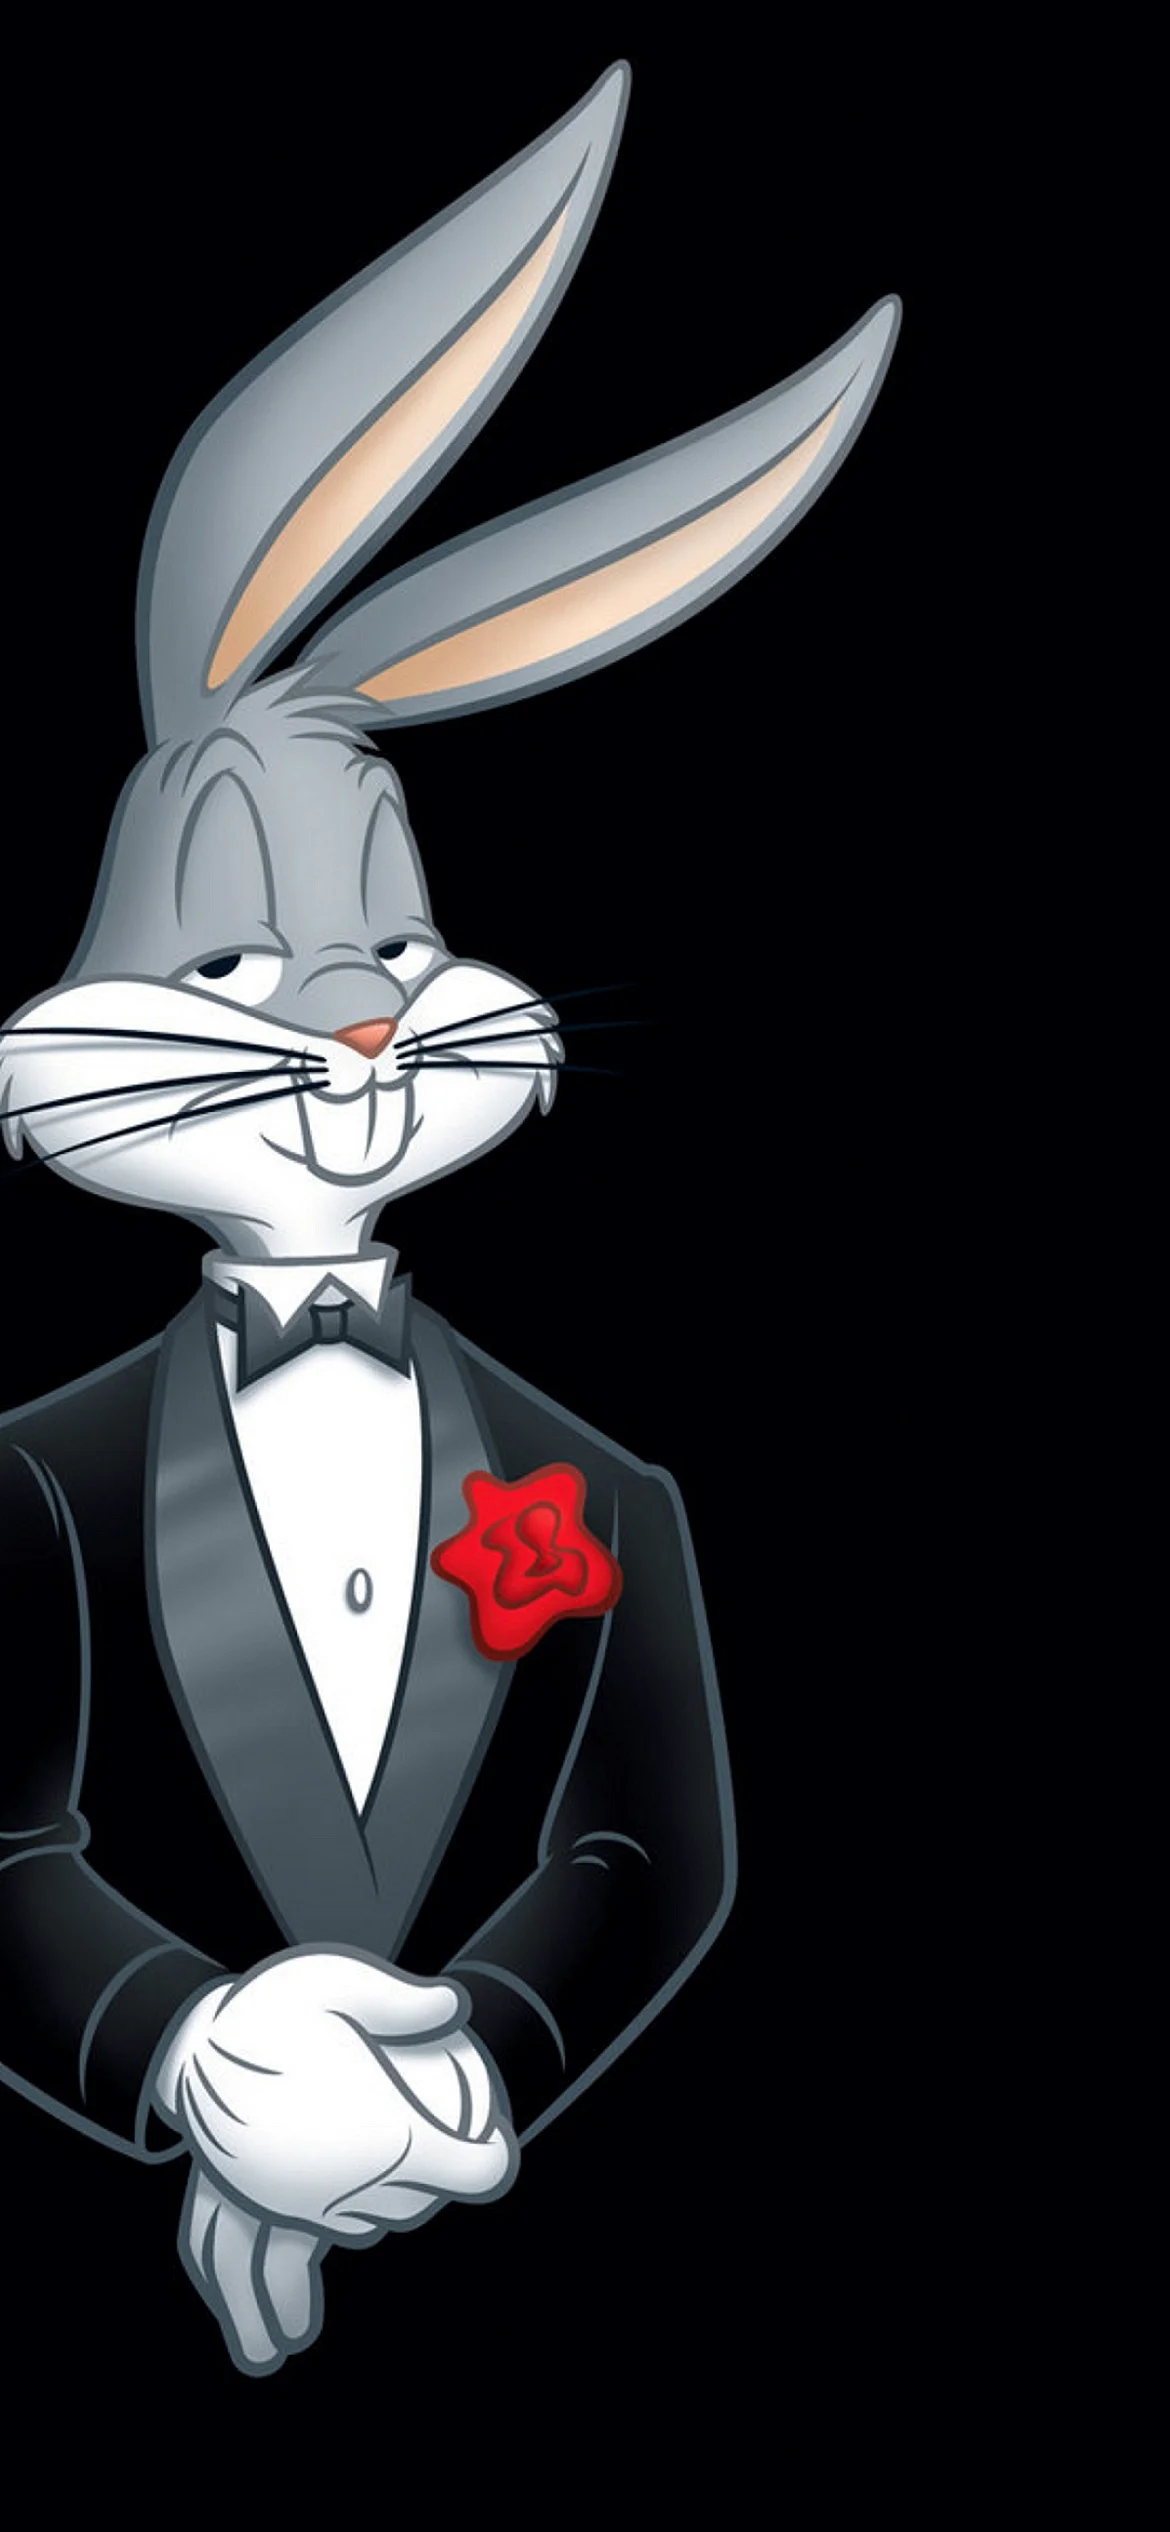 Bugs Bunny Wallpaper for iPhone 12 Pro